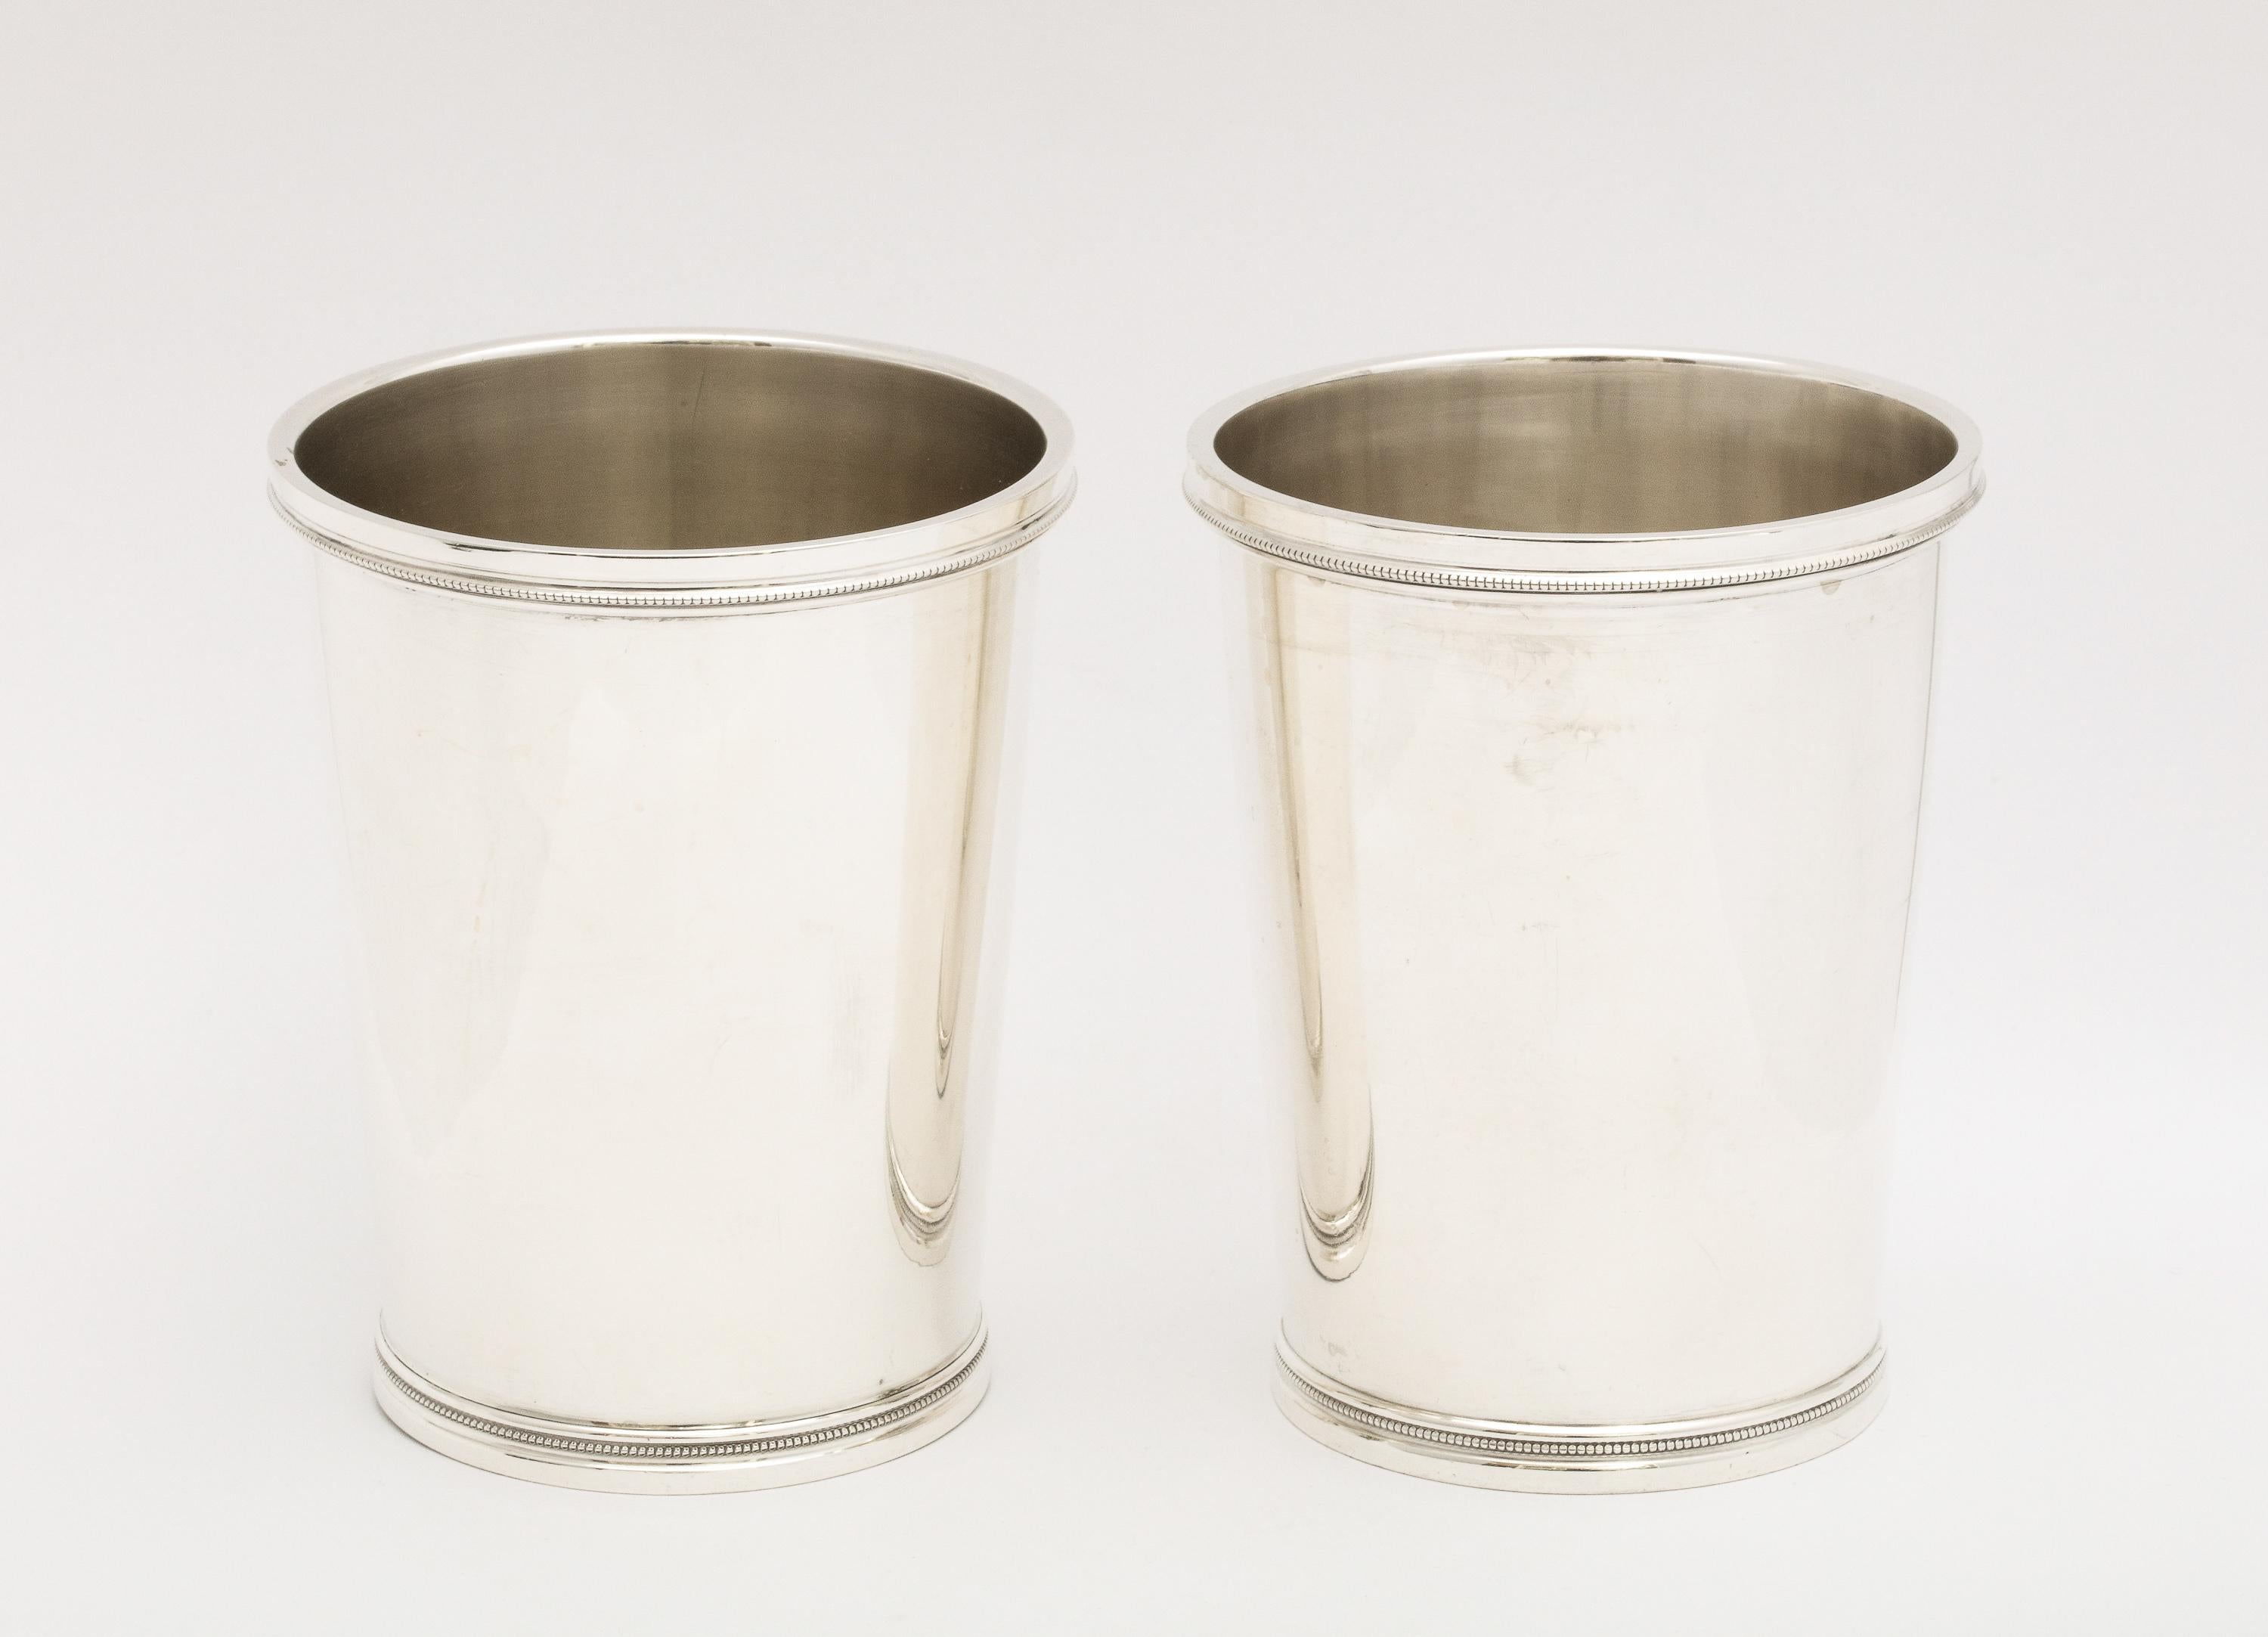 Pair of Art Deco, sterling silver mint julep cups, The Chicago Silver Company, Chicago, Illinois, Ca. 1930's. Each cup measures 4 inches high x 3 inches diameter. Combined weight of both cups is 8.575 troy ounces. Each cup is designed with a row of